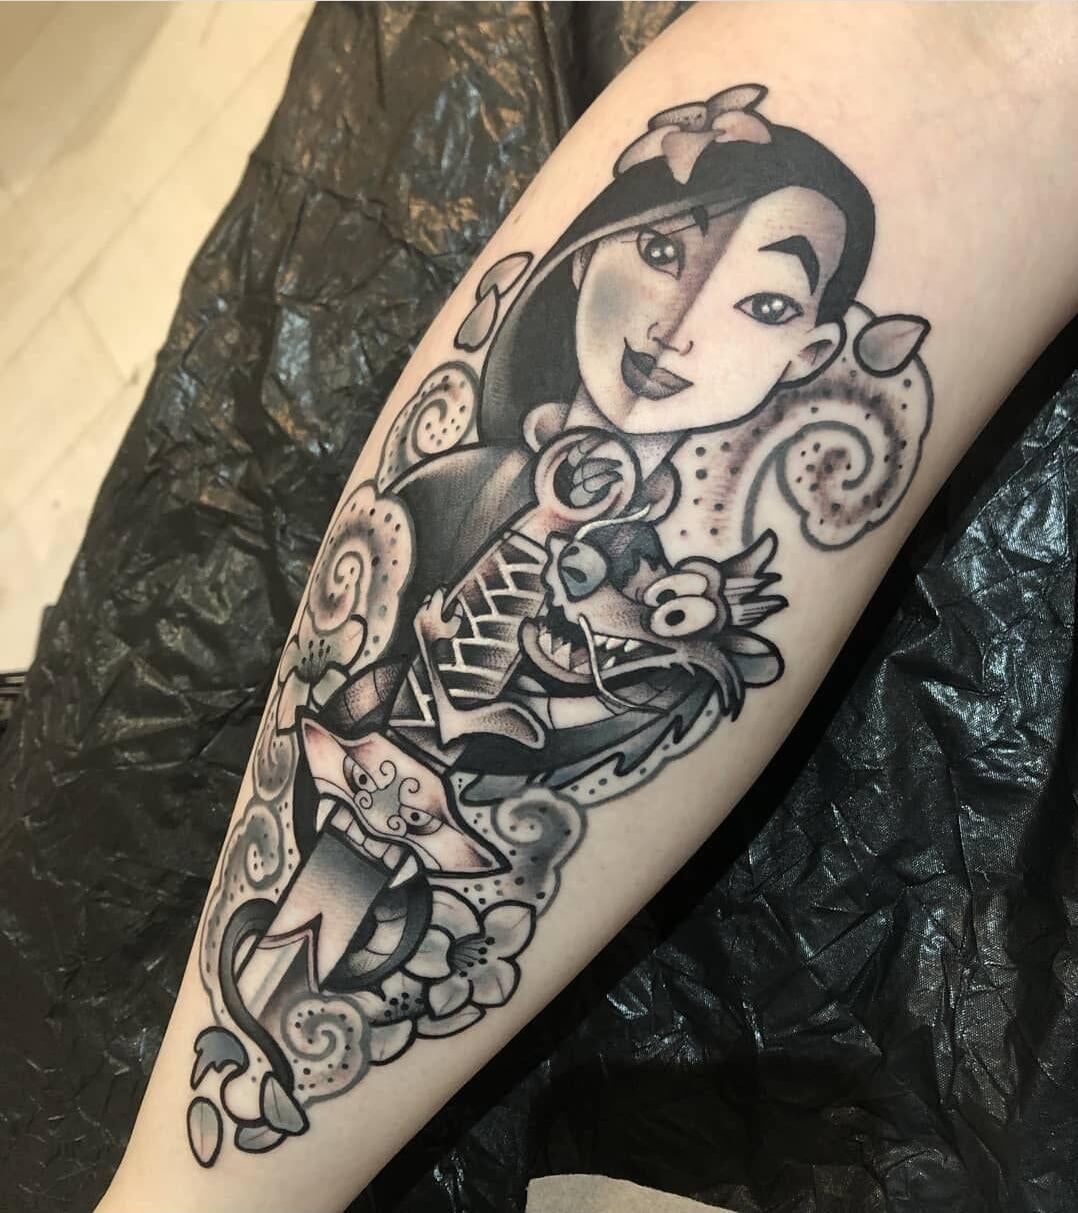 Mulan done by Lily at underground in Liverpool